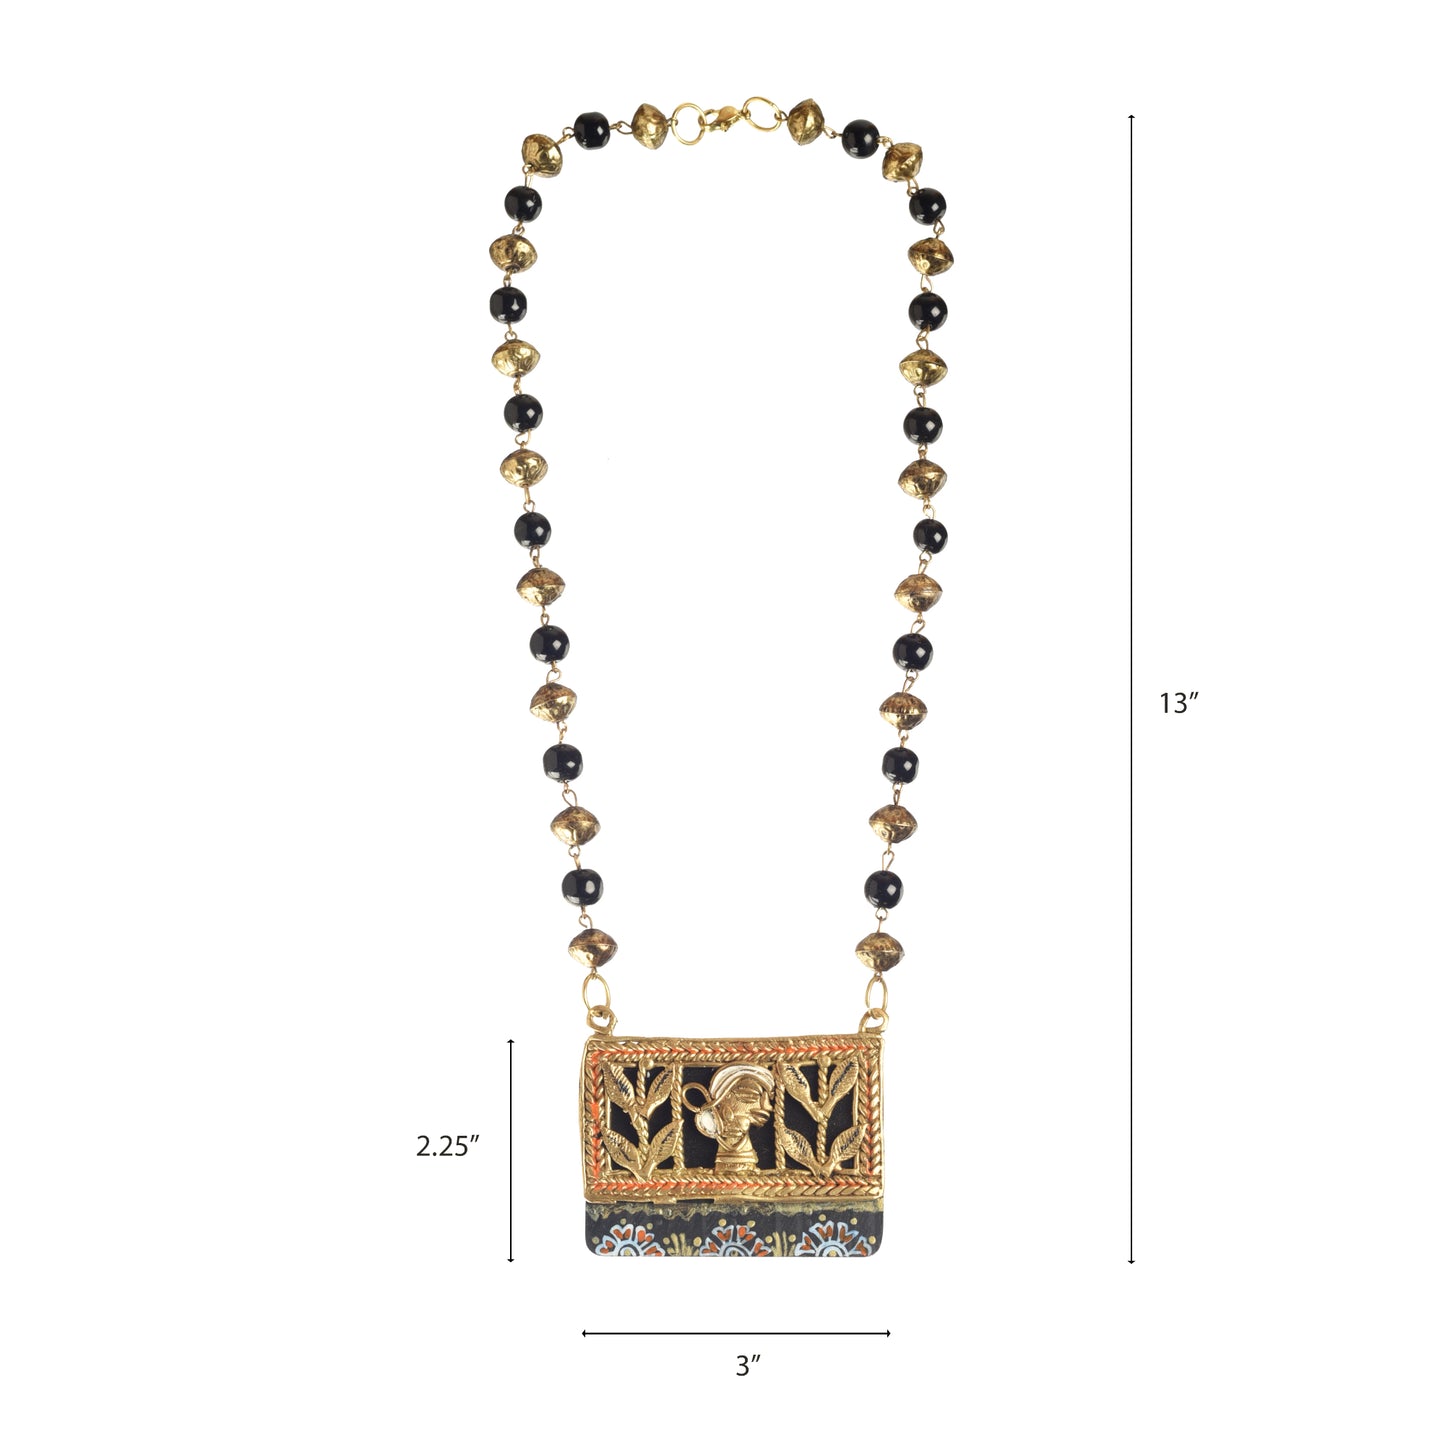 Queen of Nile Handcrafted Necklace